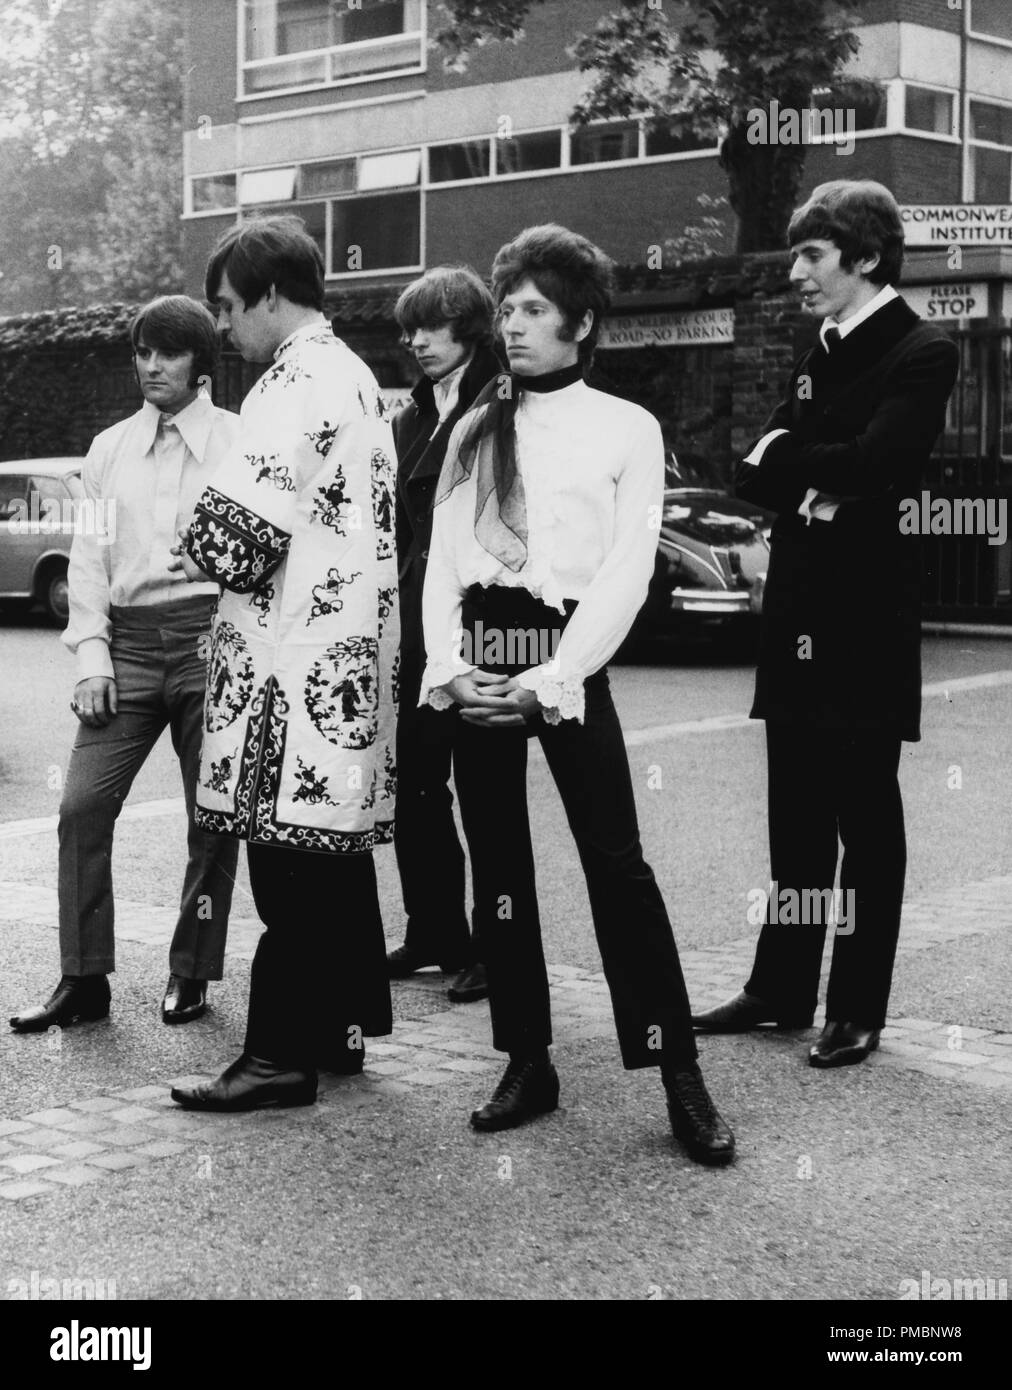 Bobby Harrison, Gary Brooker, Matthew Fisher, Ray Royer and Dave Knight of the pop band Procol Harum, 1967© JRC /The Hollywood Archive - All Rights Reserved  File Reference # 32603 076THA Stock Photo